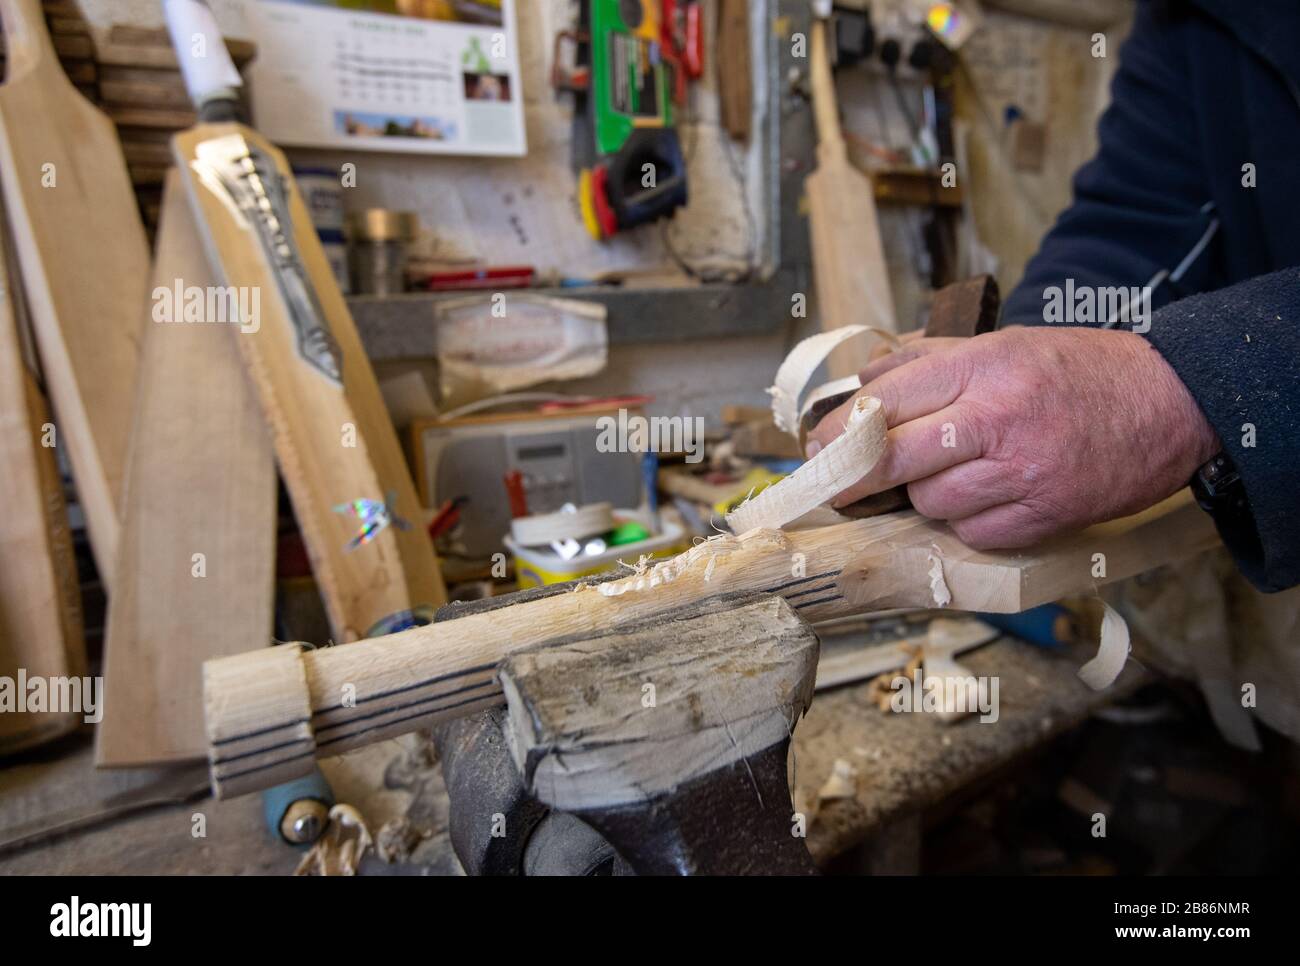 Batmaker Tony Sains crafts a handmade cricket bat at a workshop at Warsop Stebbing in East Hanningfield, Essex. With the start of the season just weeks away, the ECB, the governing body of cricket have recommend that all forms of recreational cricket are for now suspended. Stock Photo